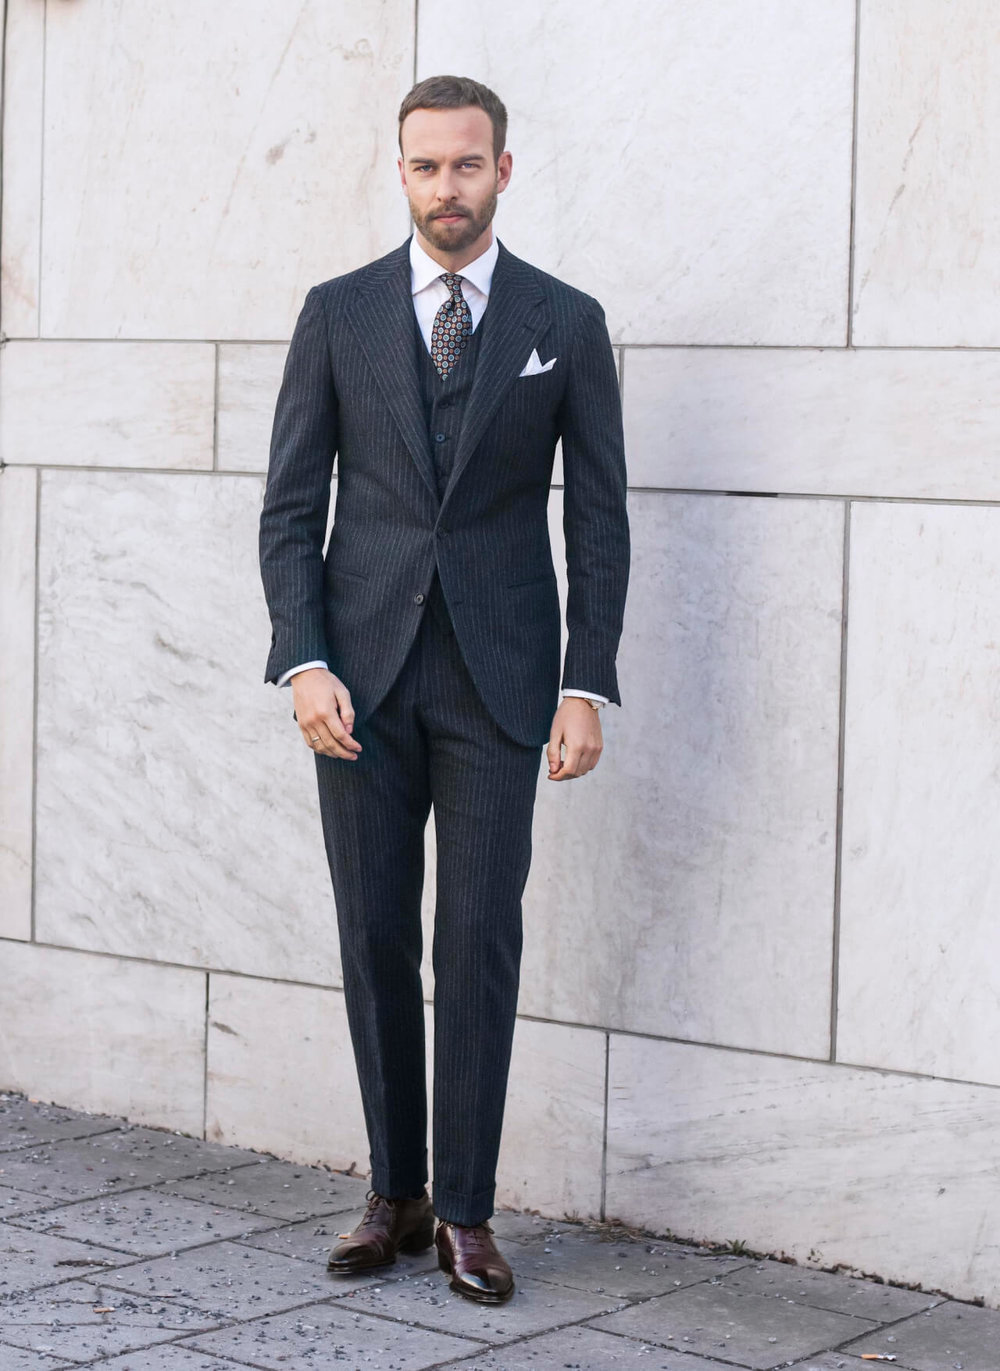 Modern-cut-three-piece-suit-with-simple-white-linen-pocket-square-and-printed-tie.jpg